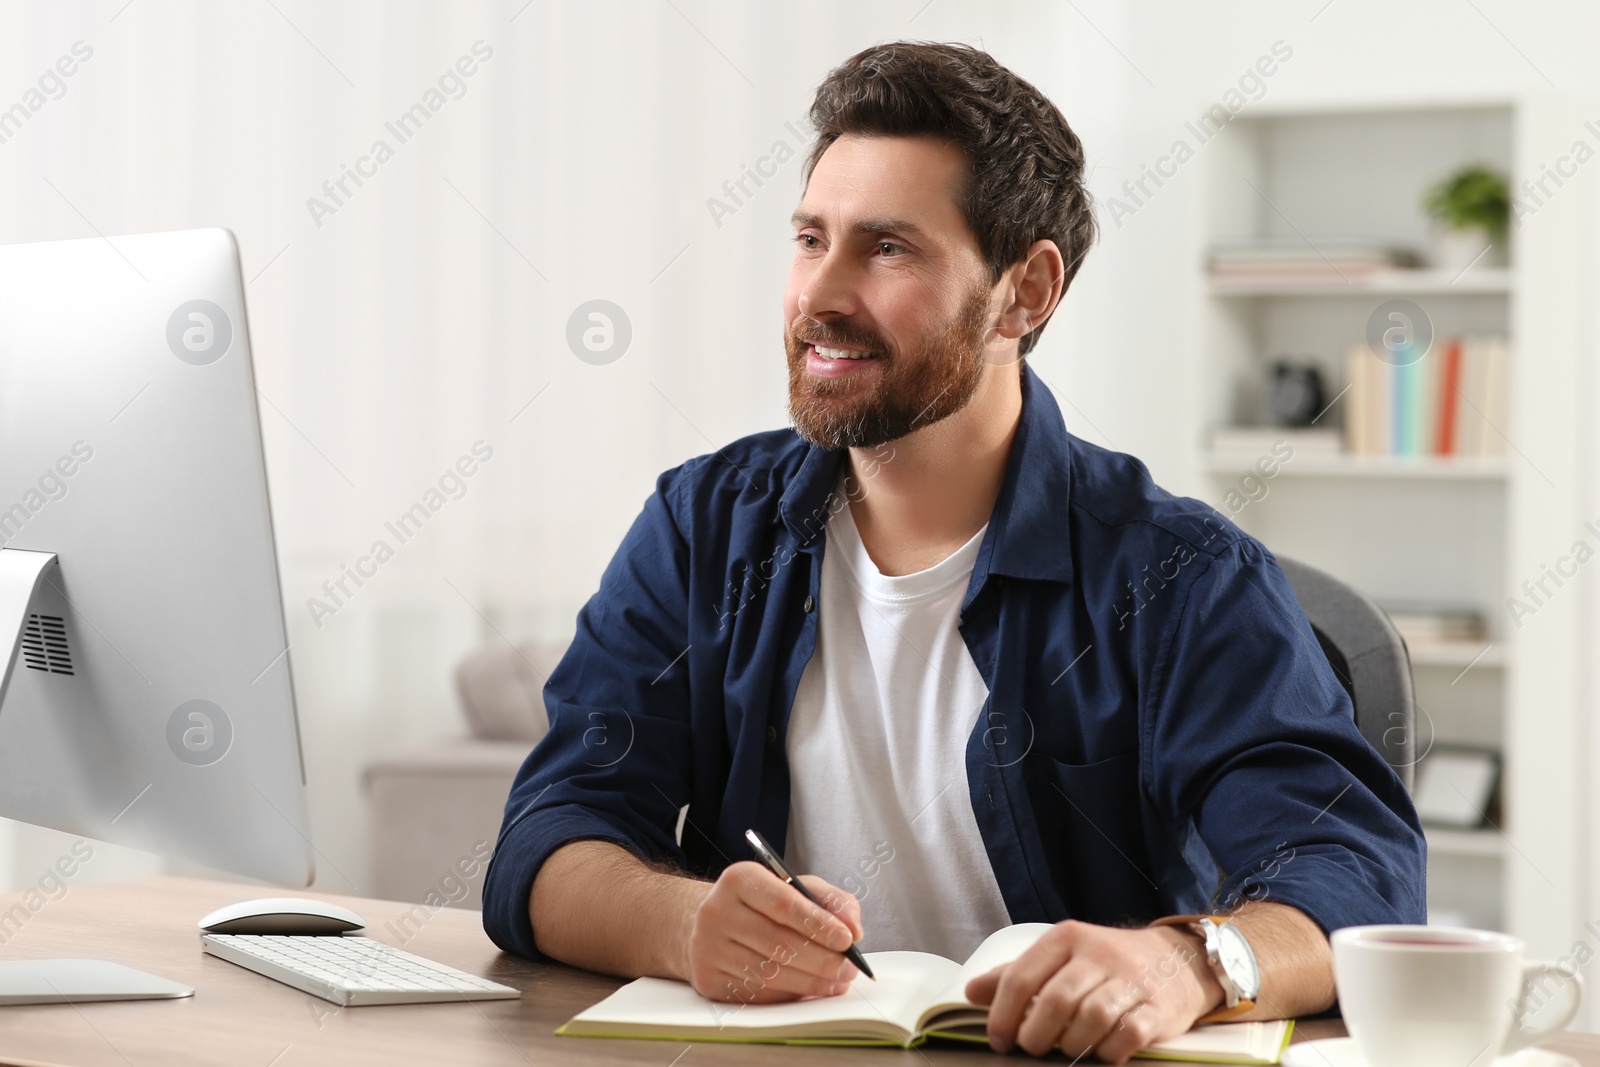 Photo of Home workplace. Happy man taking notes while working with computer at wooden desk in room